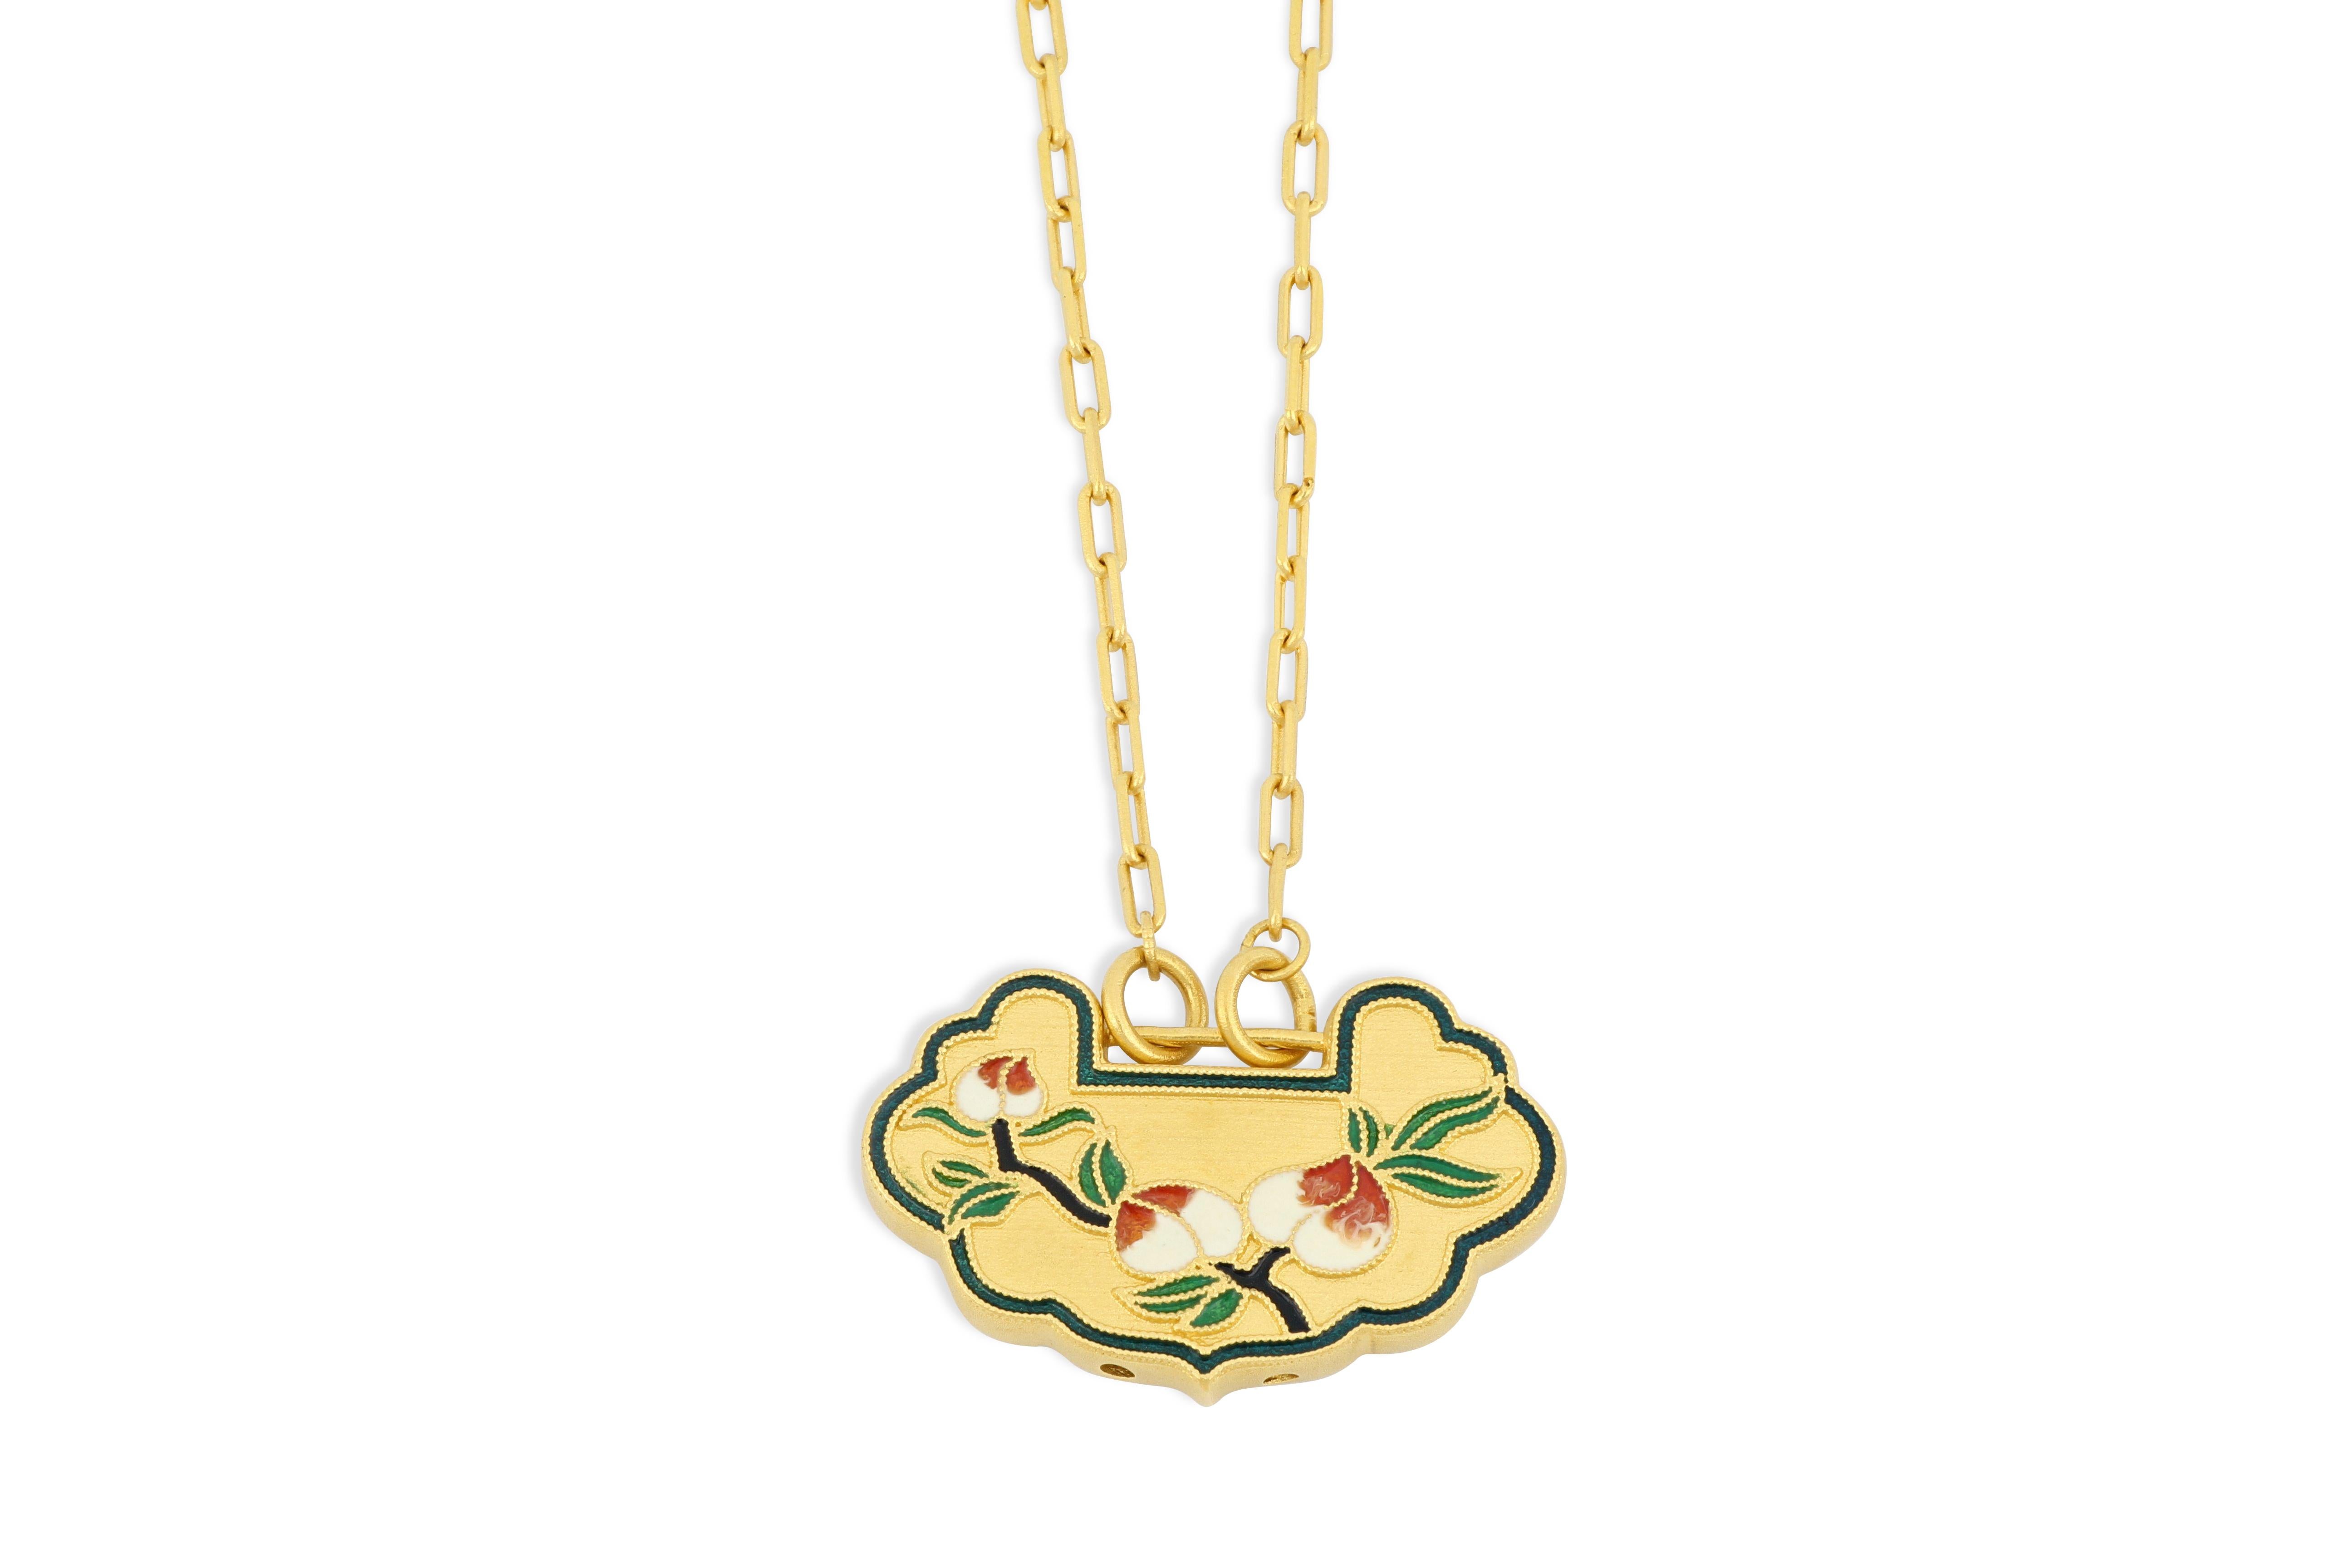 This is a very special piece of pendant necklace, made of 99.9% pure gold weighing approximately 18g, with colourful decorative floral pattren of Chinese theme. The shape of the pendant is of the form of 